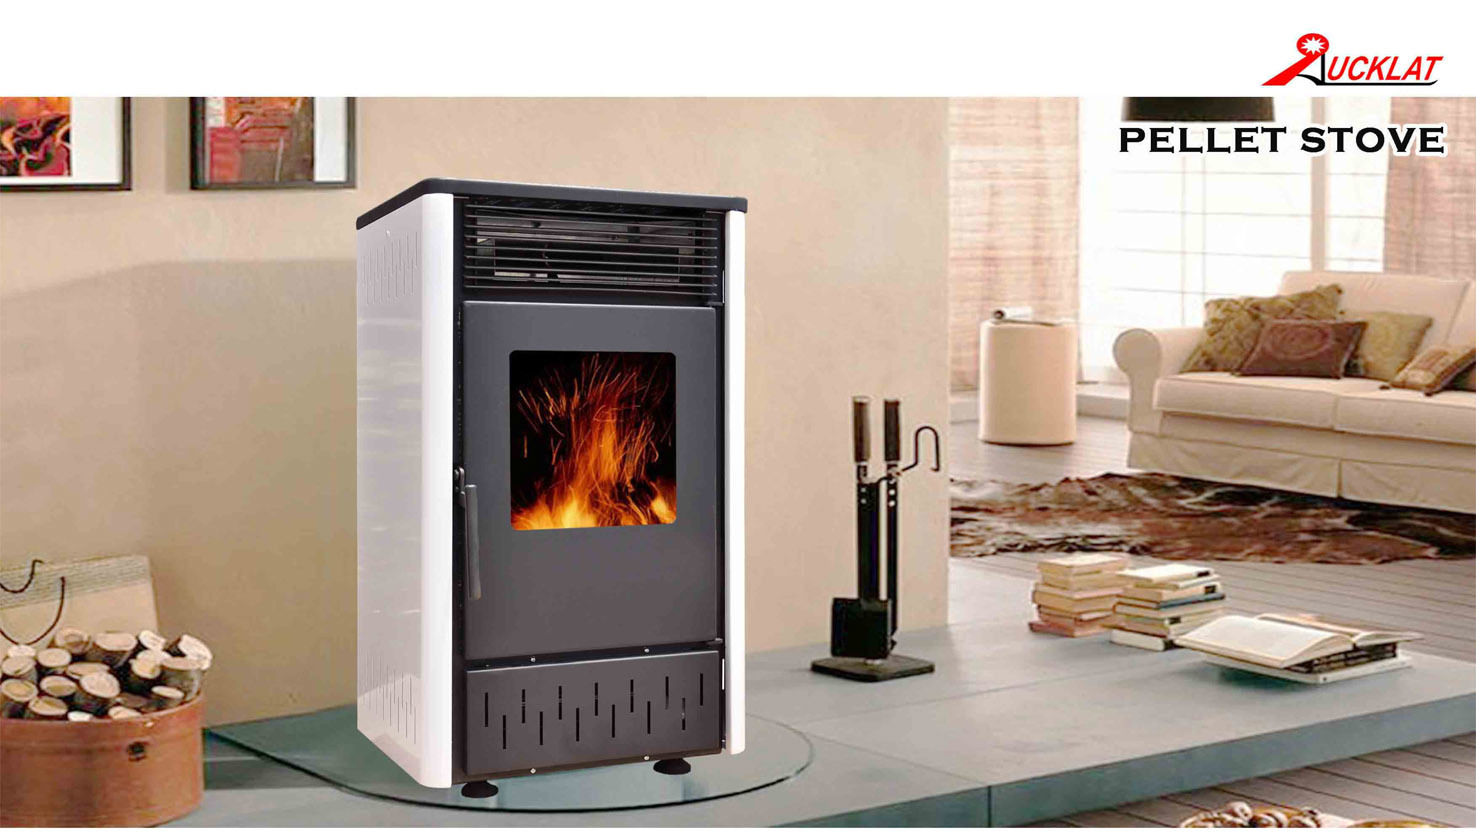 2014 New Product High Quality Biomass Pellet Stove